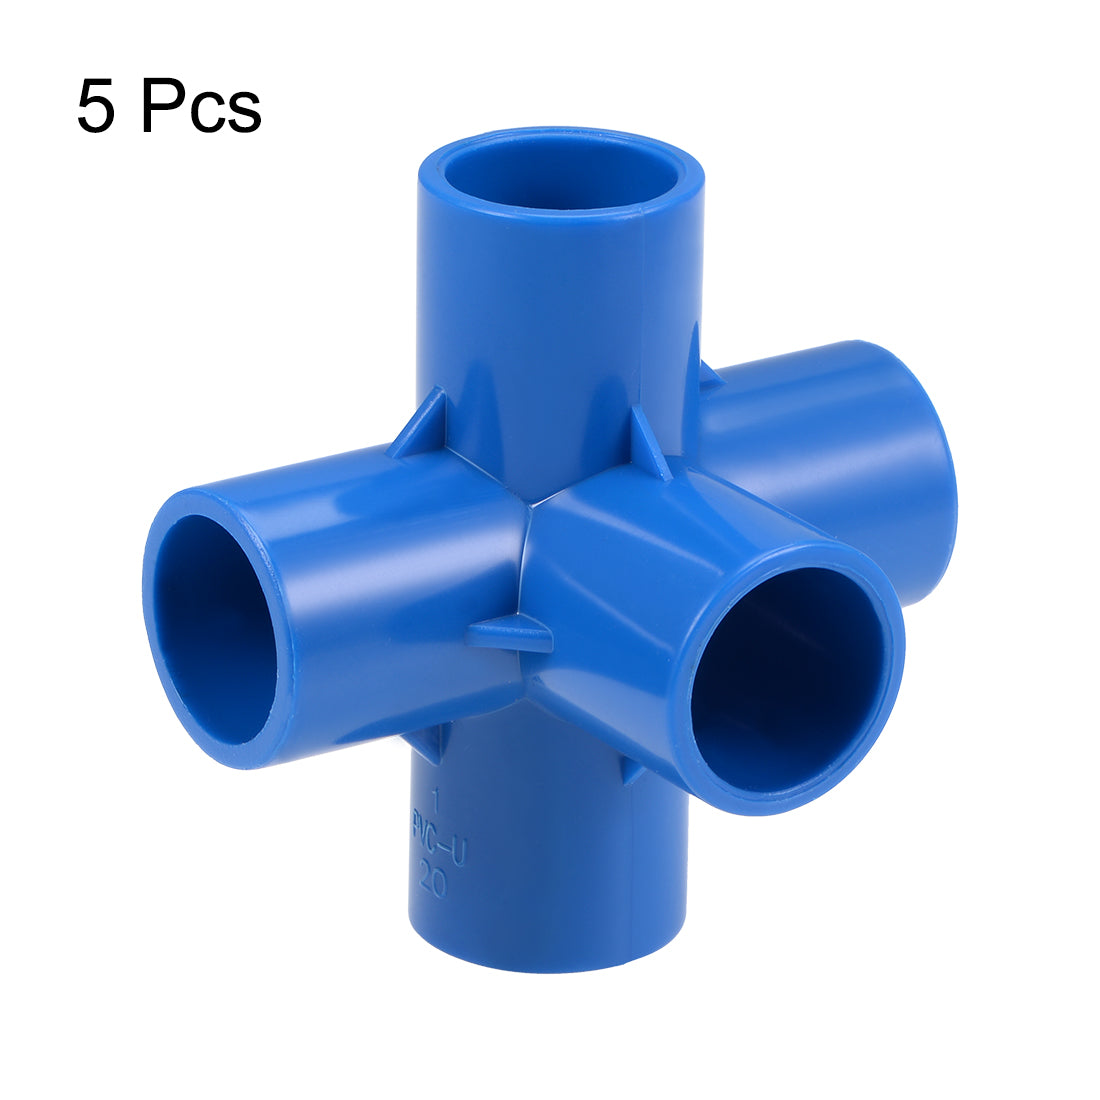 uxcell Uxcell 5 Way 20mm Tee Metric PVC Fitting Elbow - PVC Furniture Elbow Fittings Blue 5Pcs